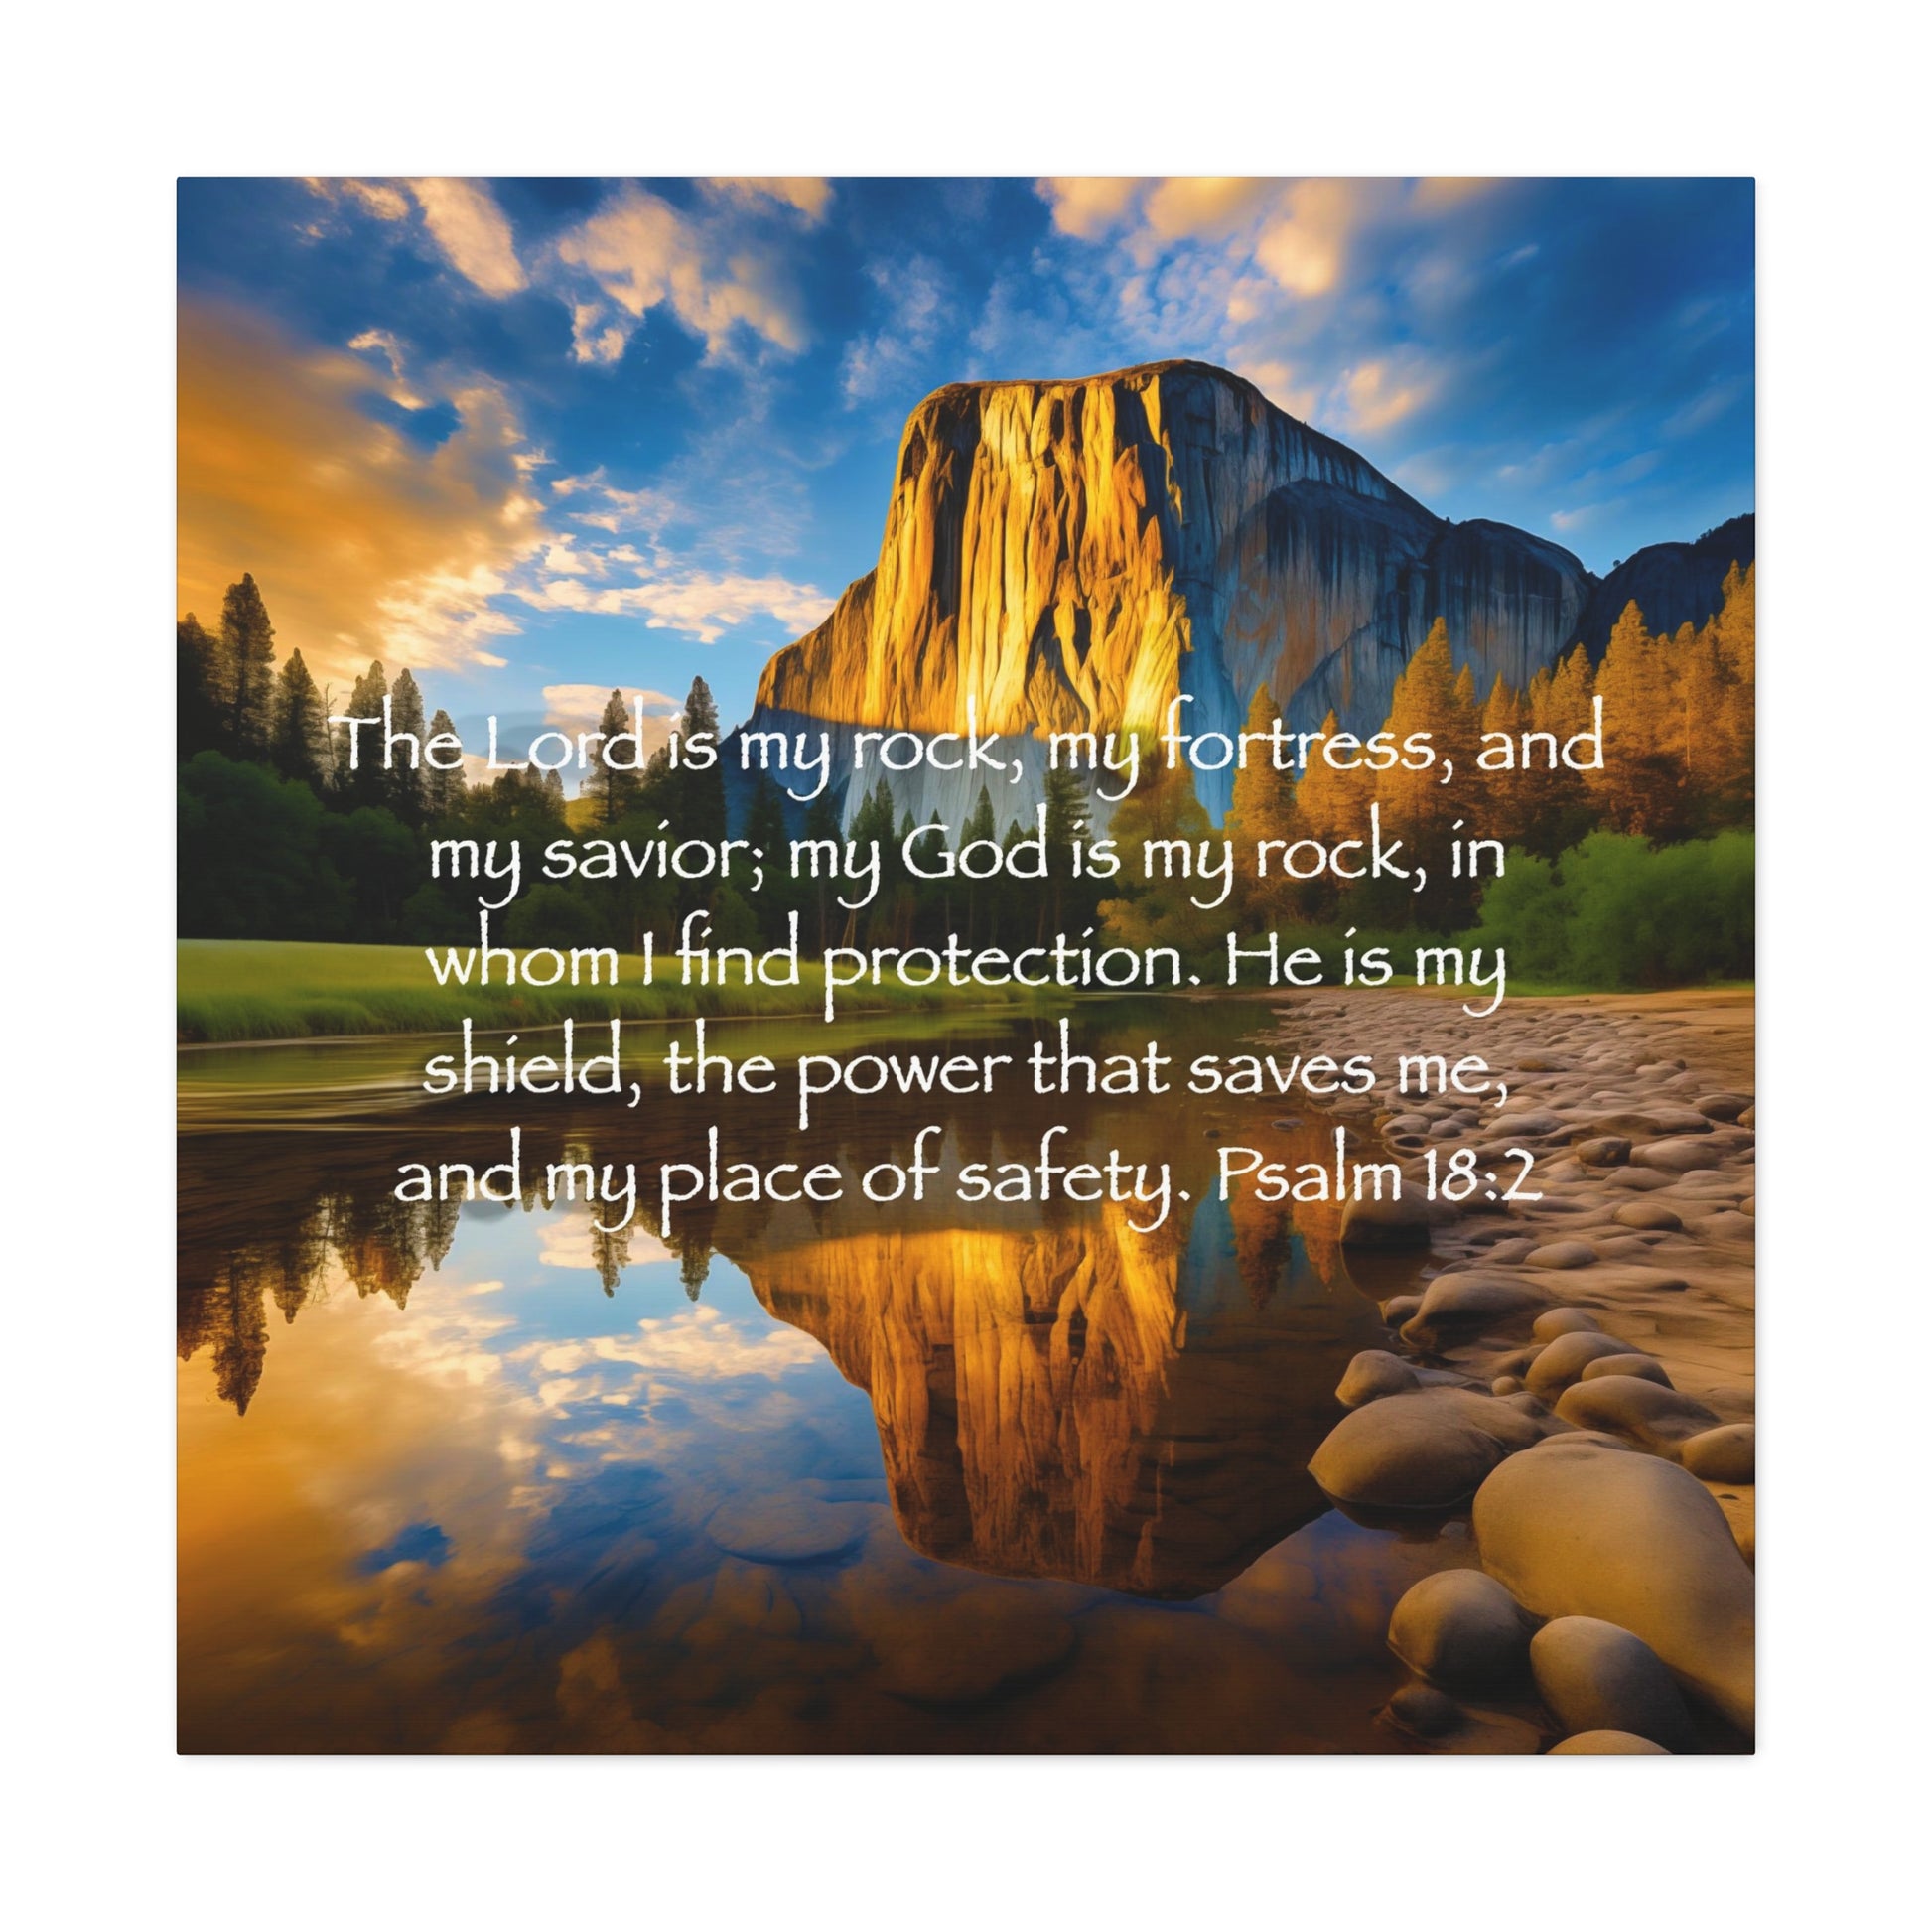 Christian art picture gifts the lord is my rock, Psalm 18:2 wall decor gifts for Christians